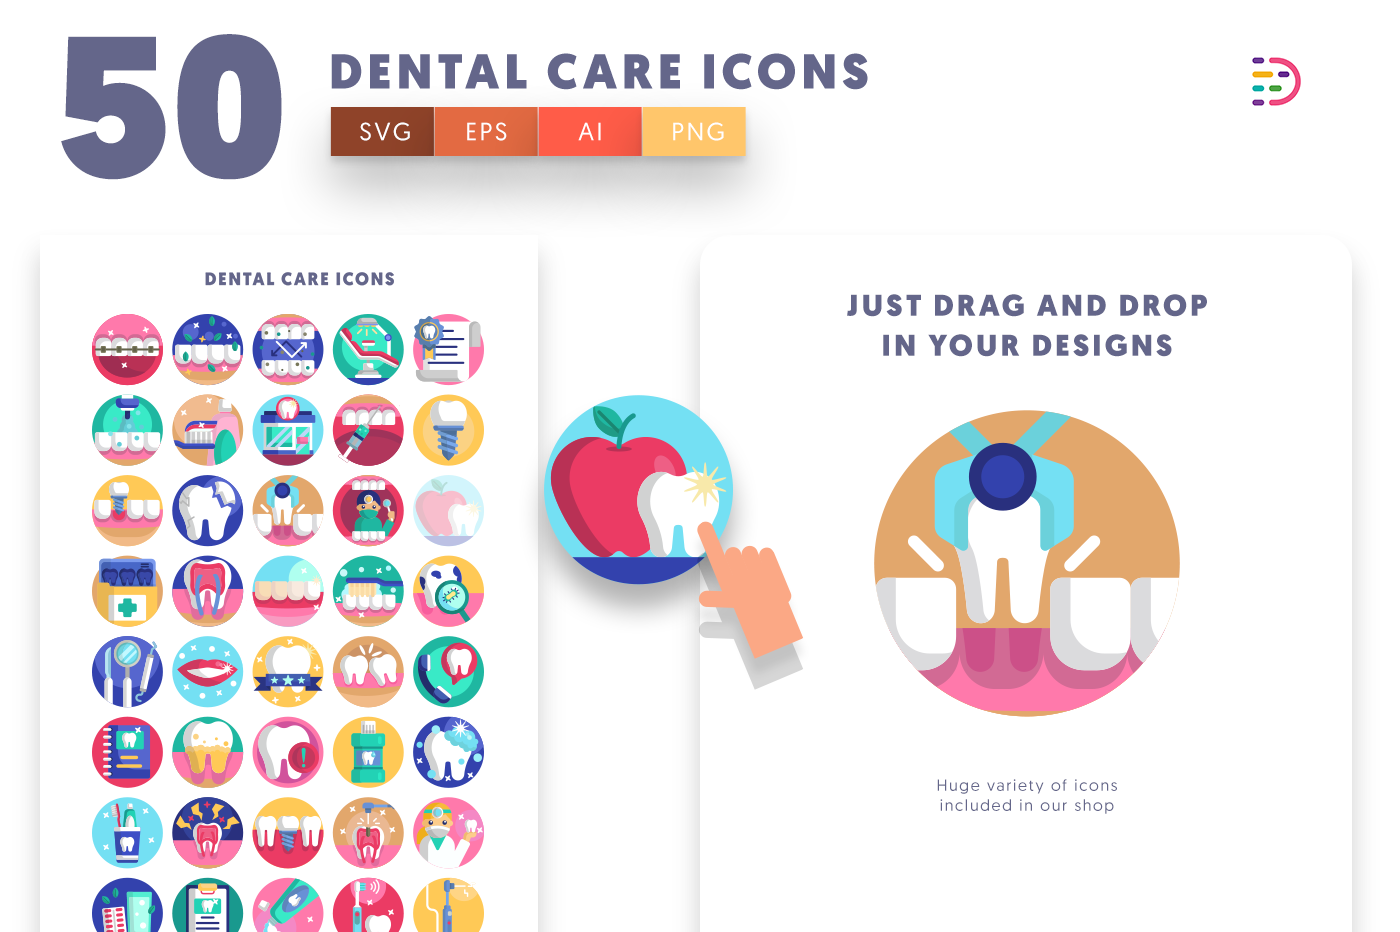 Drag and drop vector 50 Dental Care Icons 